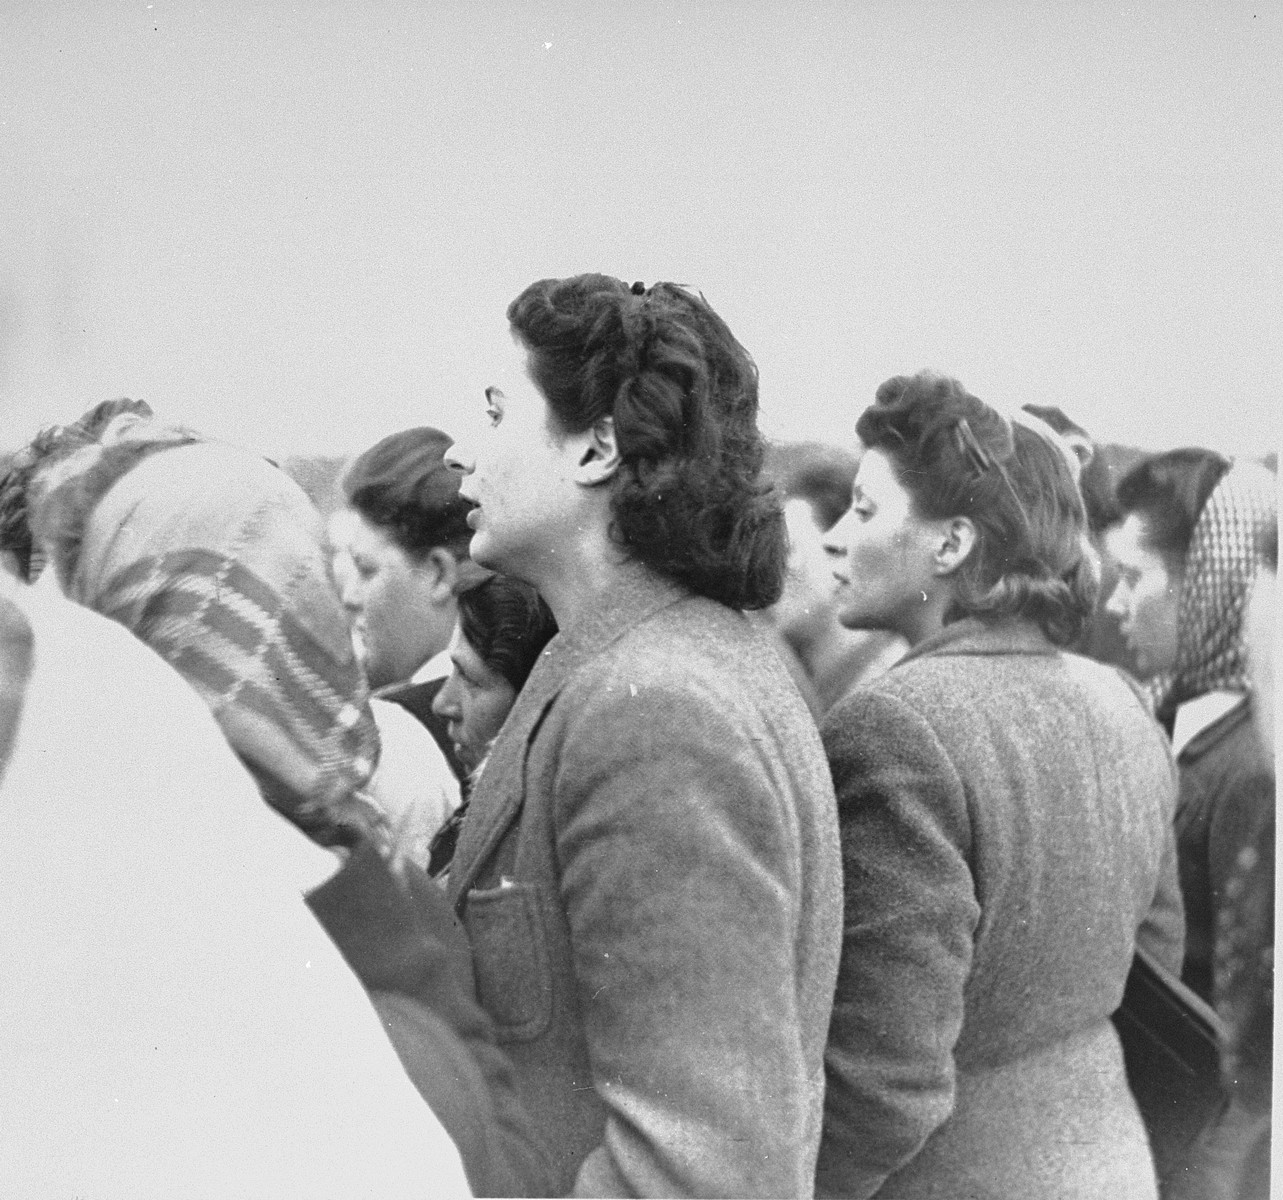 Women survivors in Bergen-Belsen watch British troops forcing former SS guards to bury corpses in a mass grave.